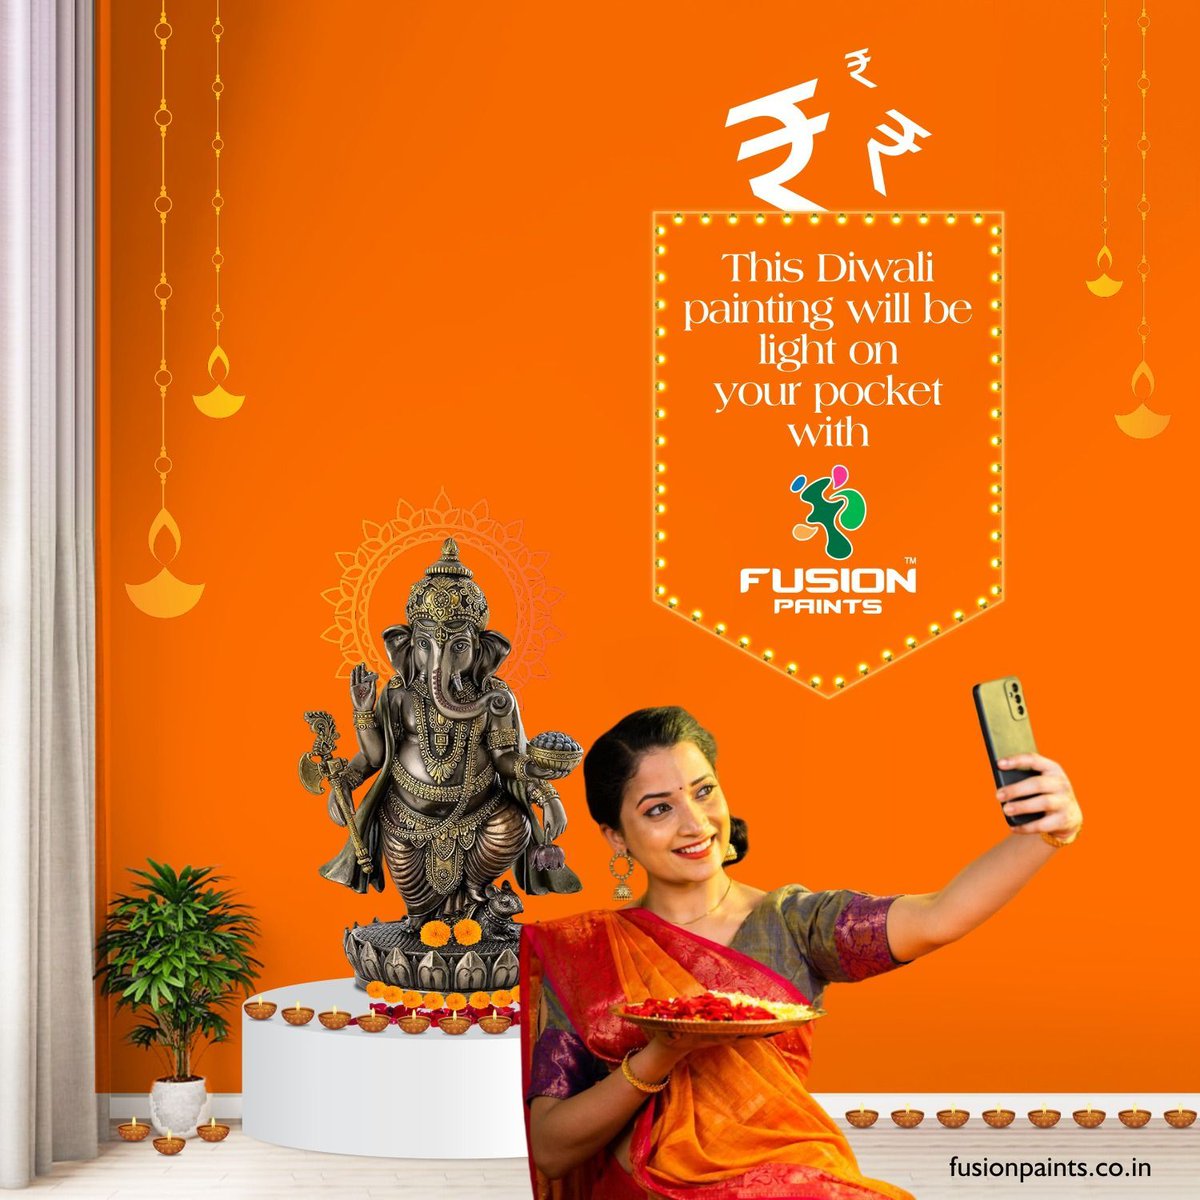 This Diwali painting won't break the bank. From a wide range of shades, select the one that best suits your lovely home.
Quickly reap the benefits! 

#fusionpaints #fusion #wallpaints #texturepaints #texturepainting #paintingideas #diwalipreparations #diwalipainting